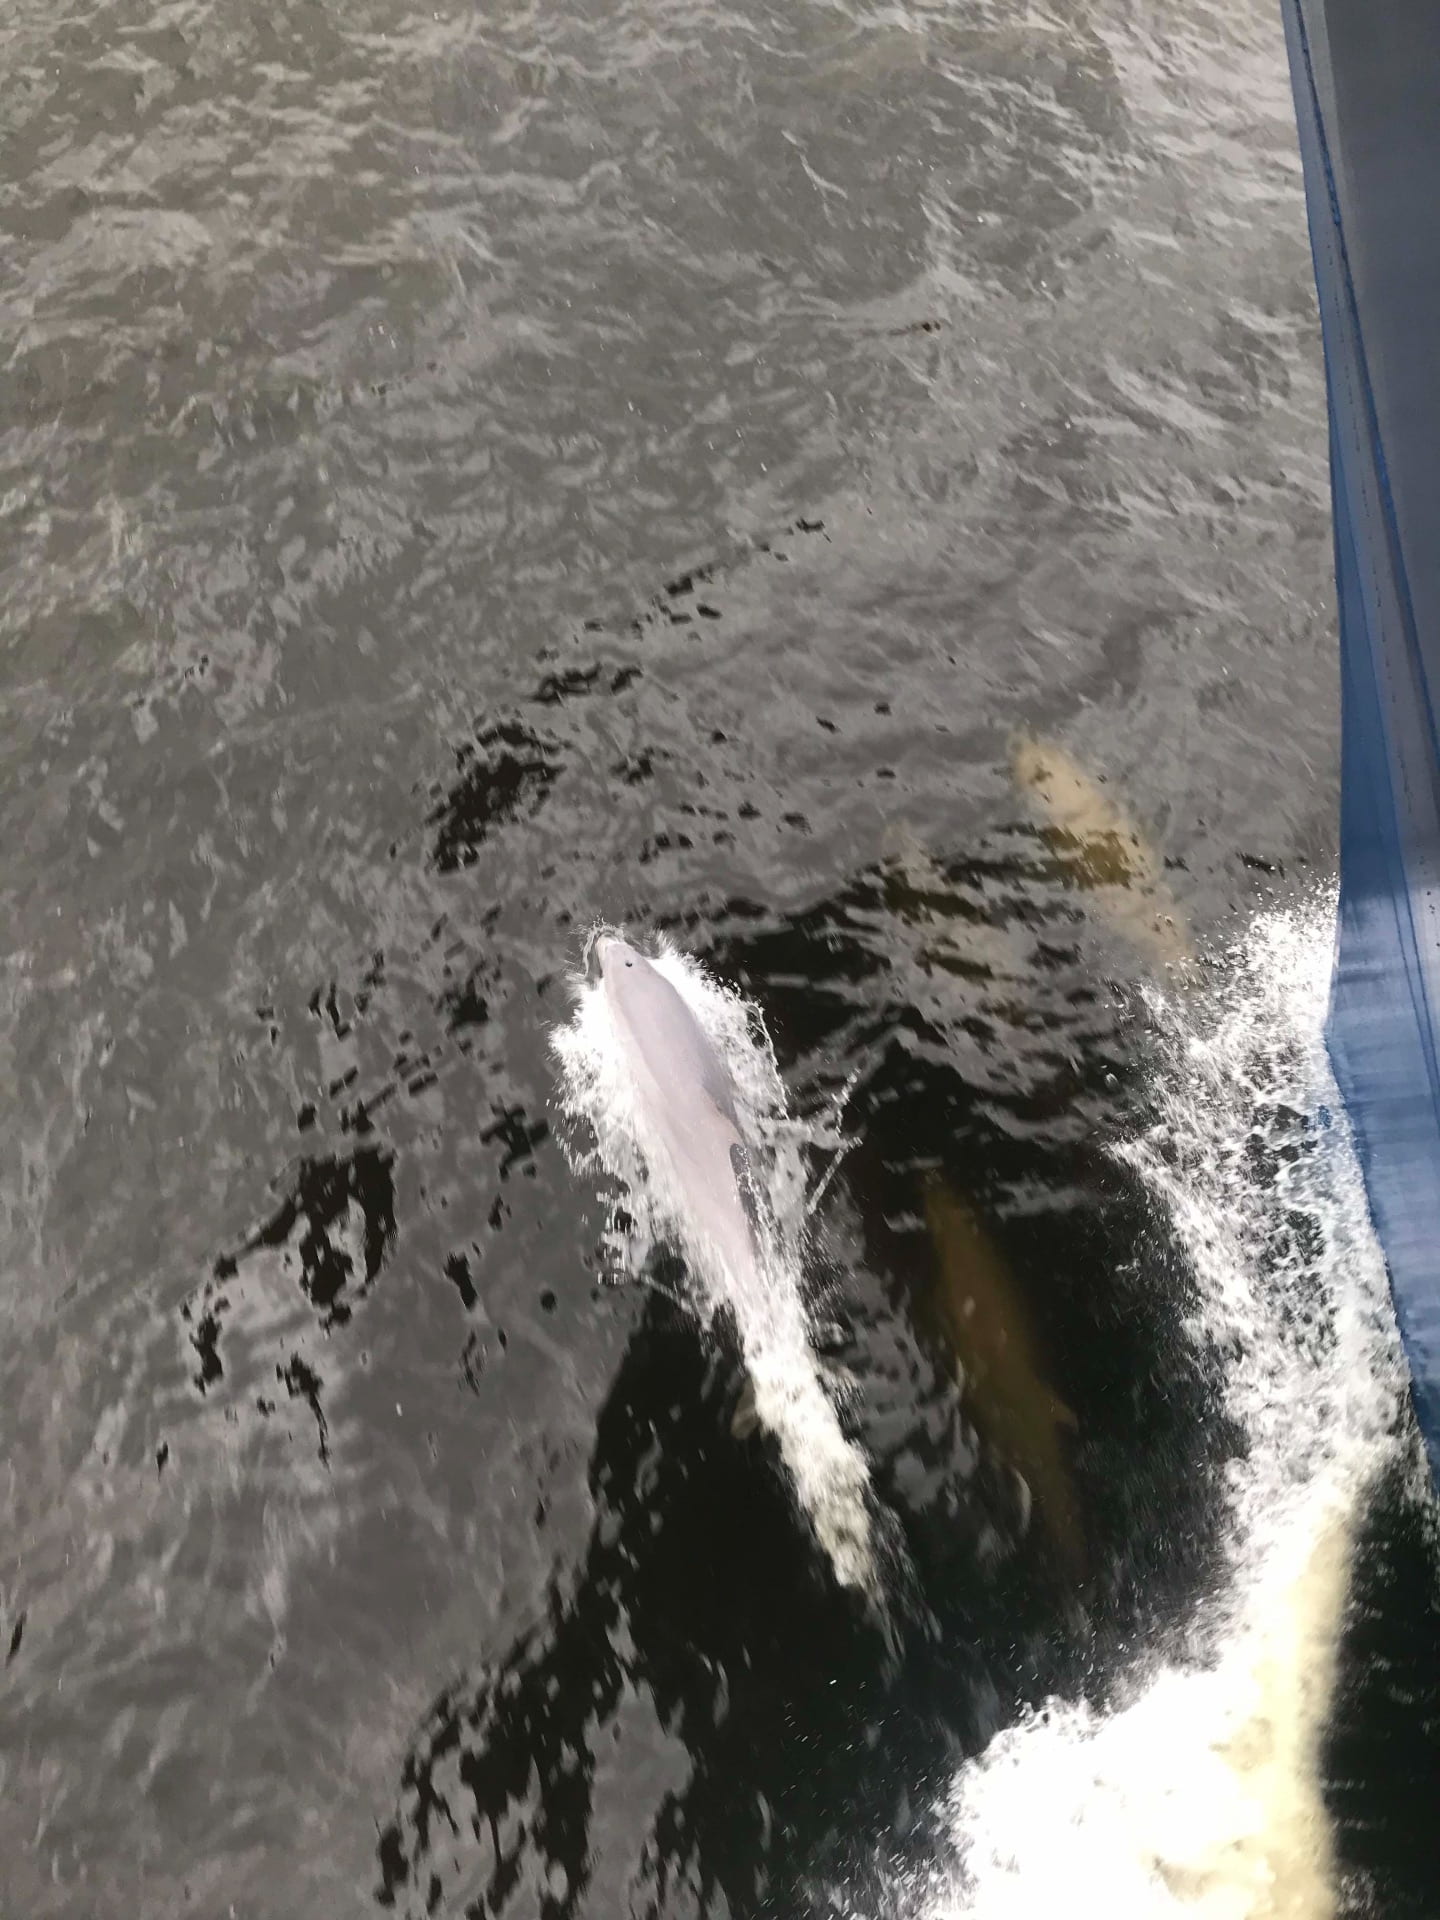 Dolphins riding the bow wake